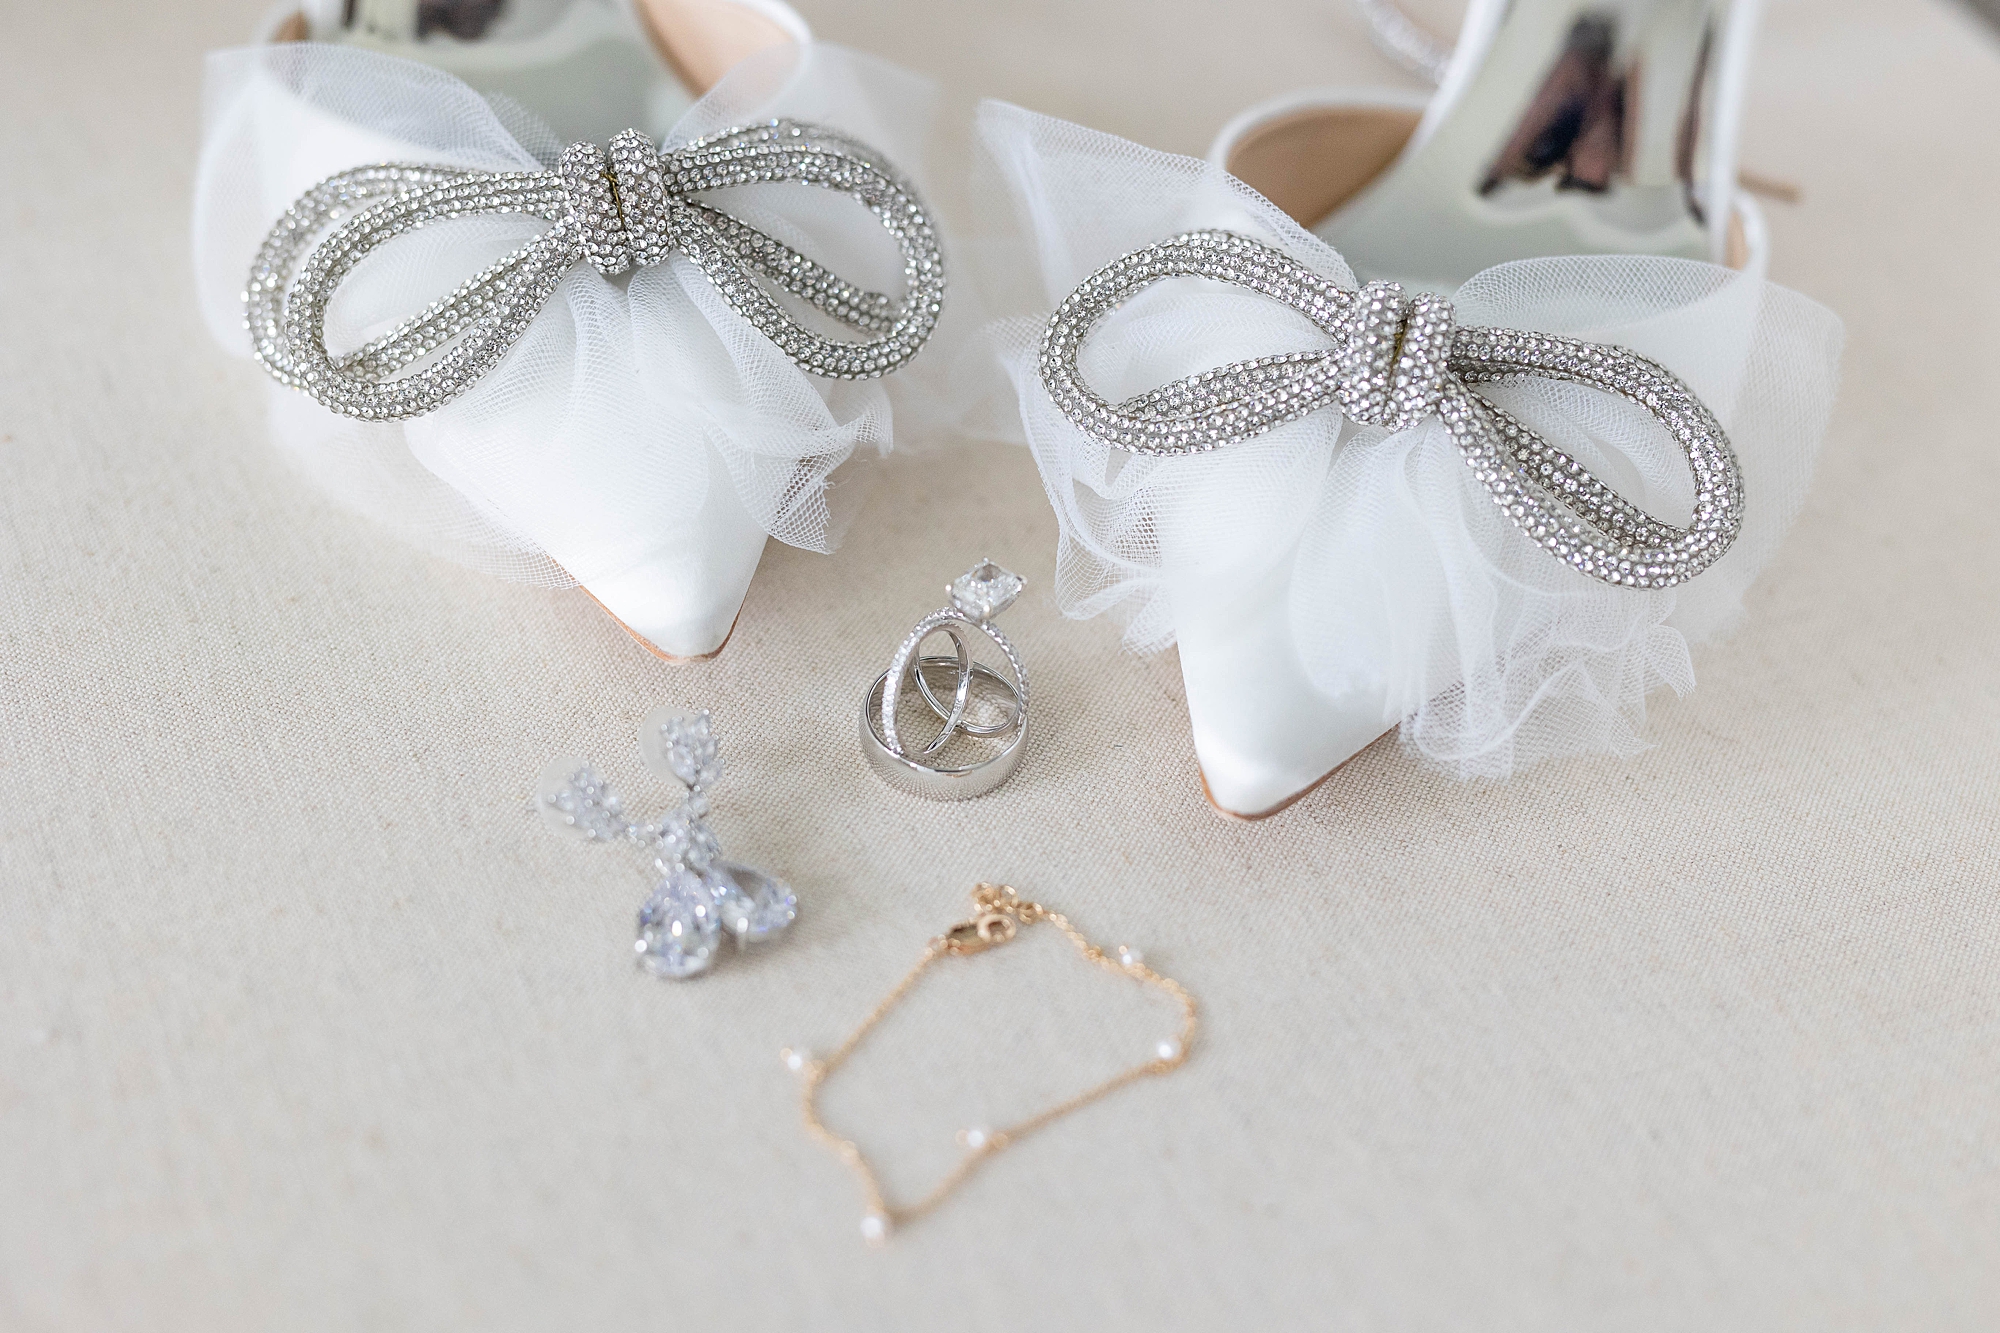 bride's jewelry and white shoes with silver bows